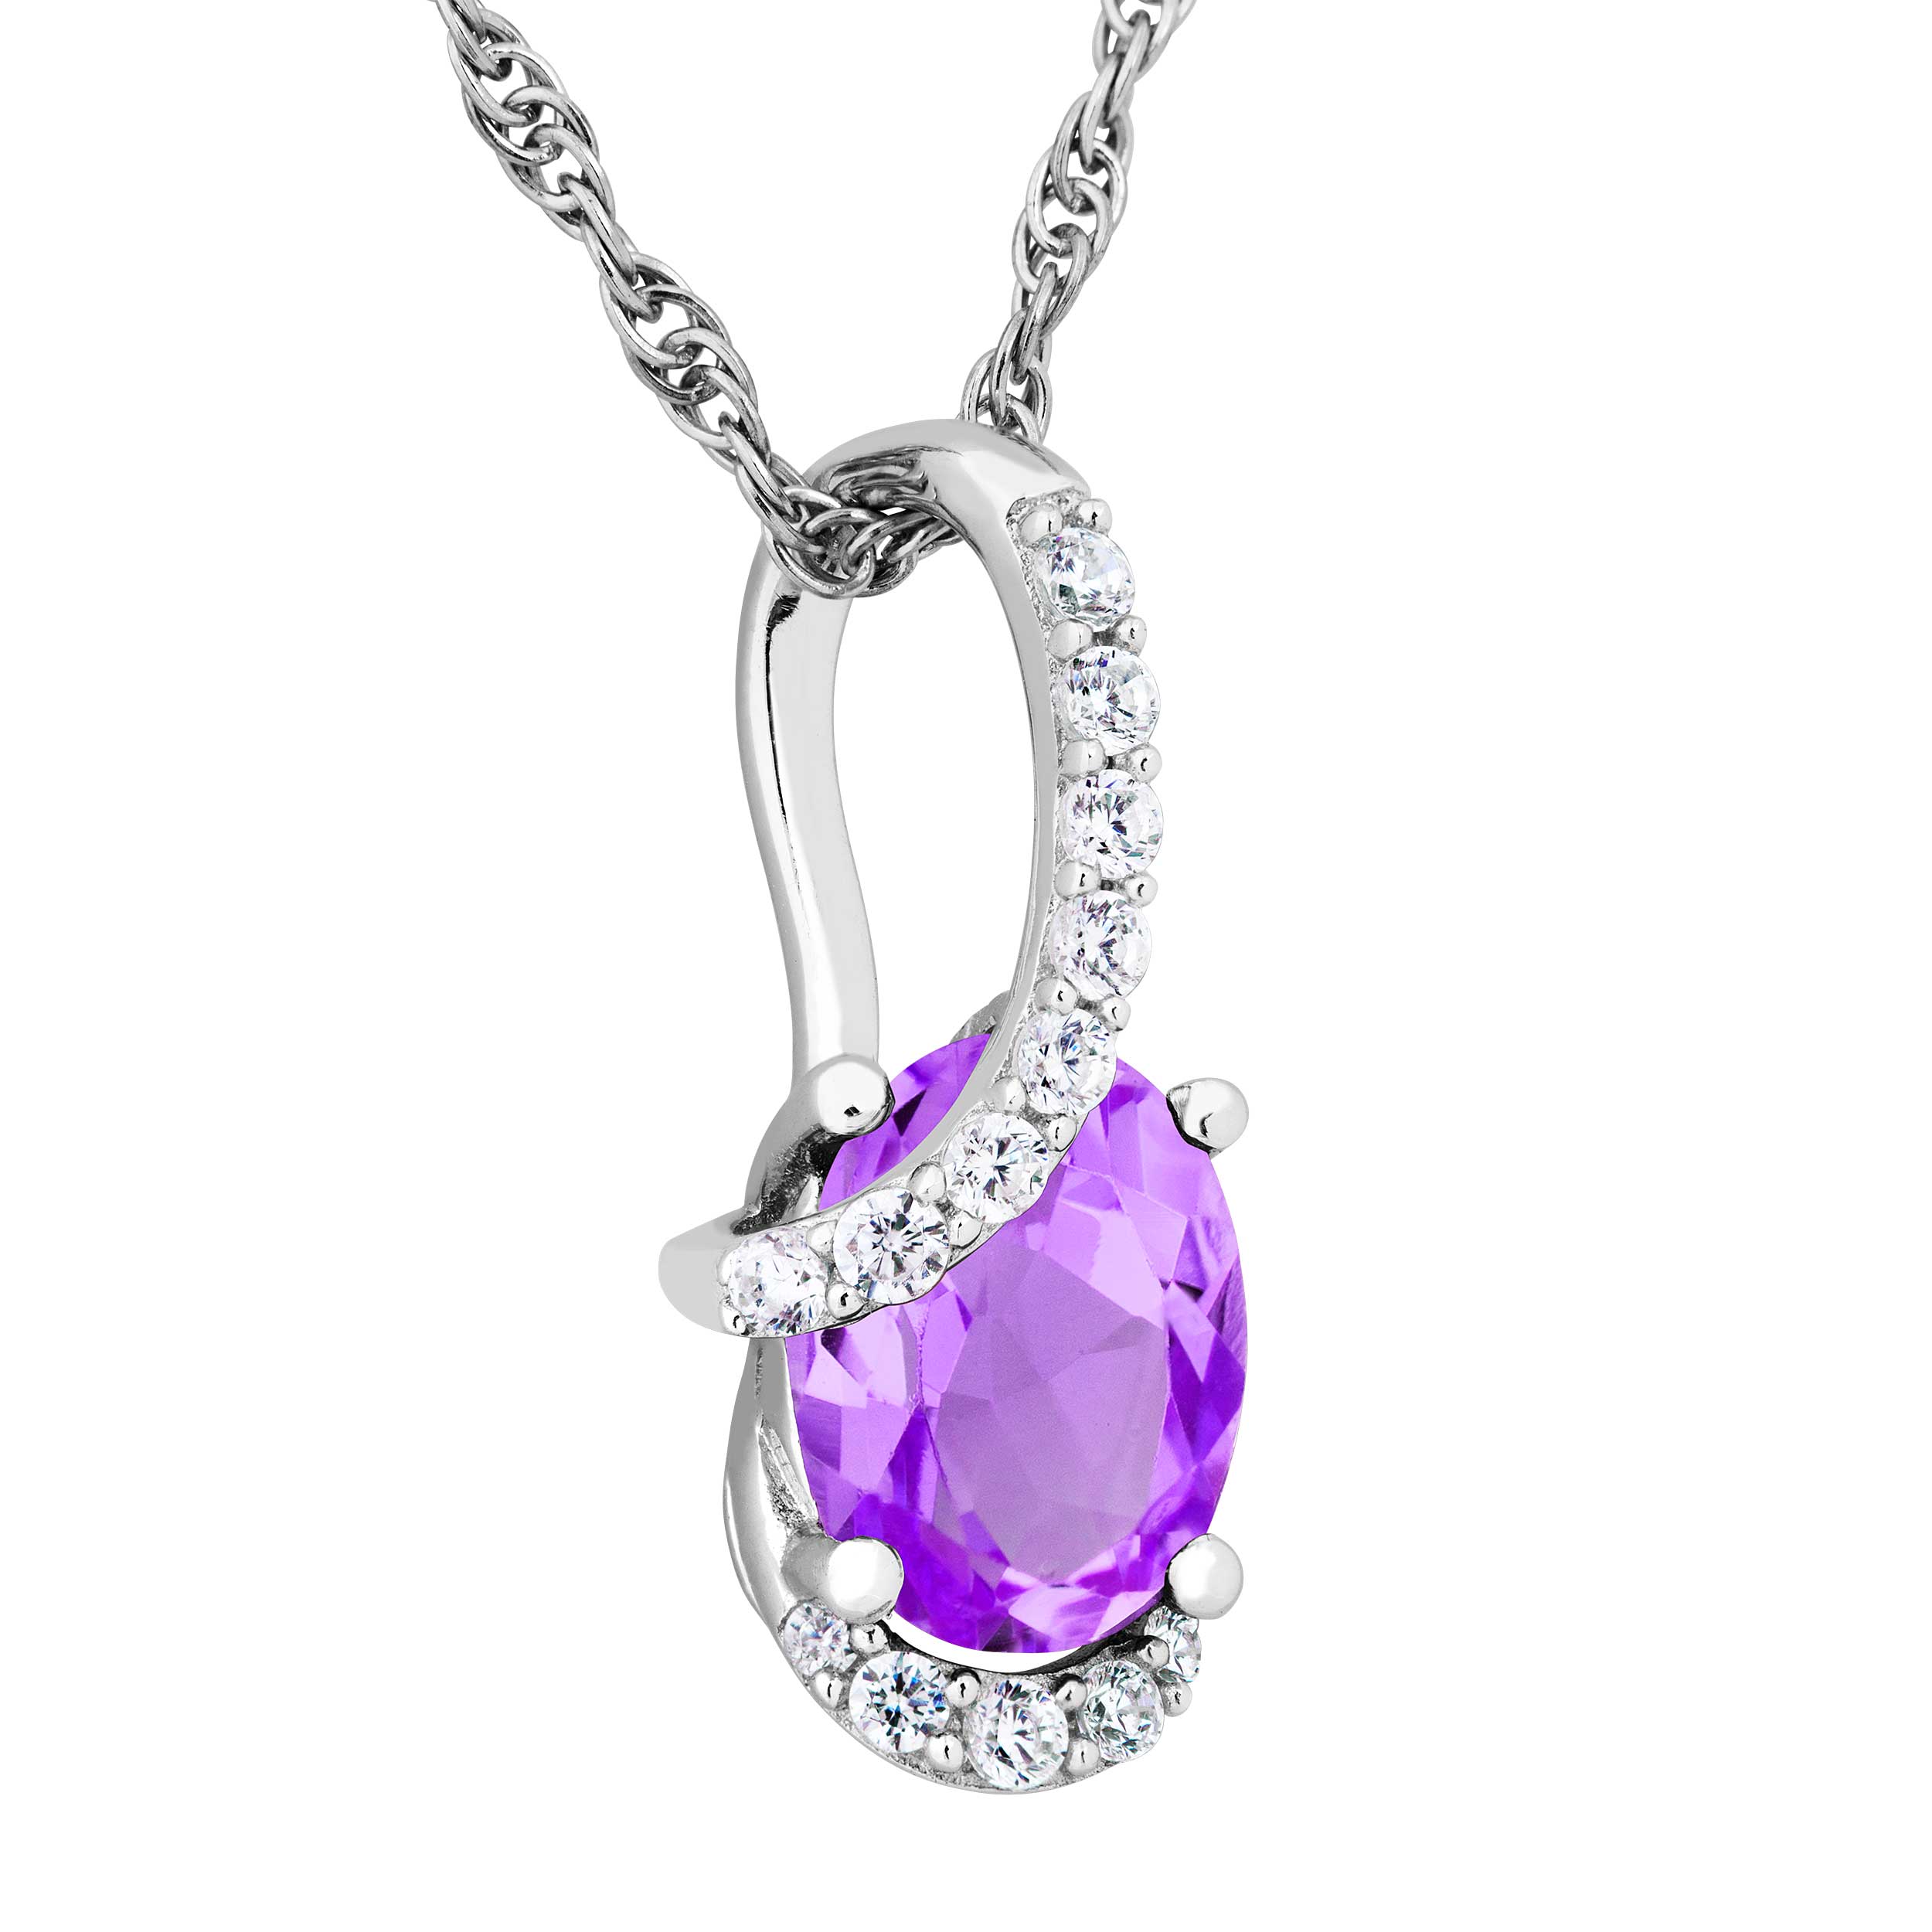 Oval  Brazillian Amethyst and White Topaz Pendant Necklace, Rhodium Plated Sterling Silver